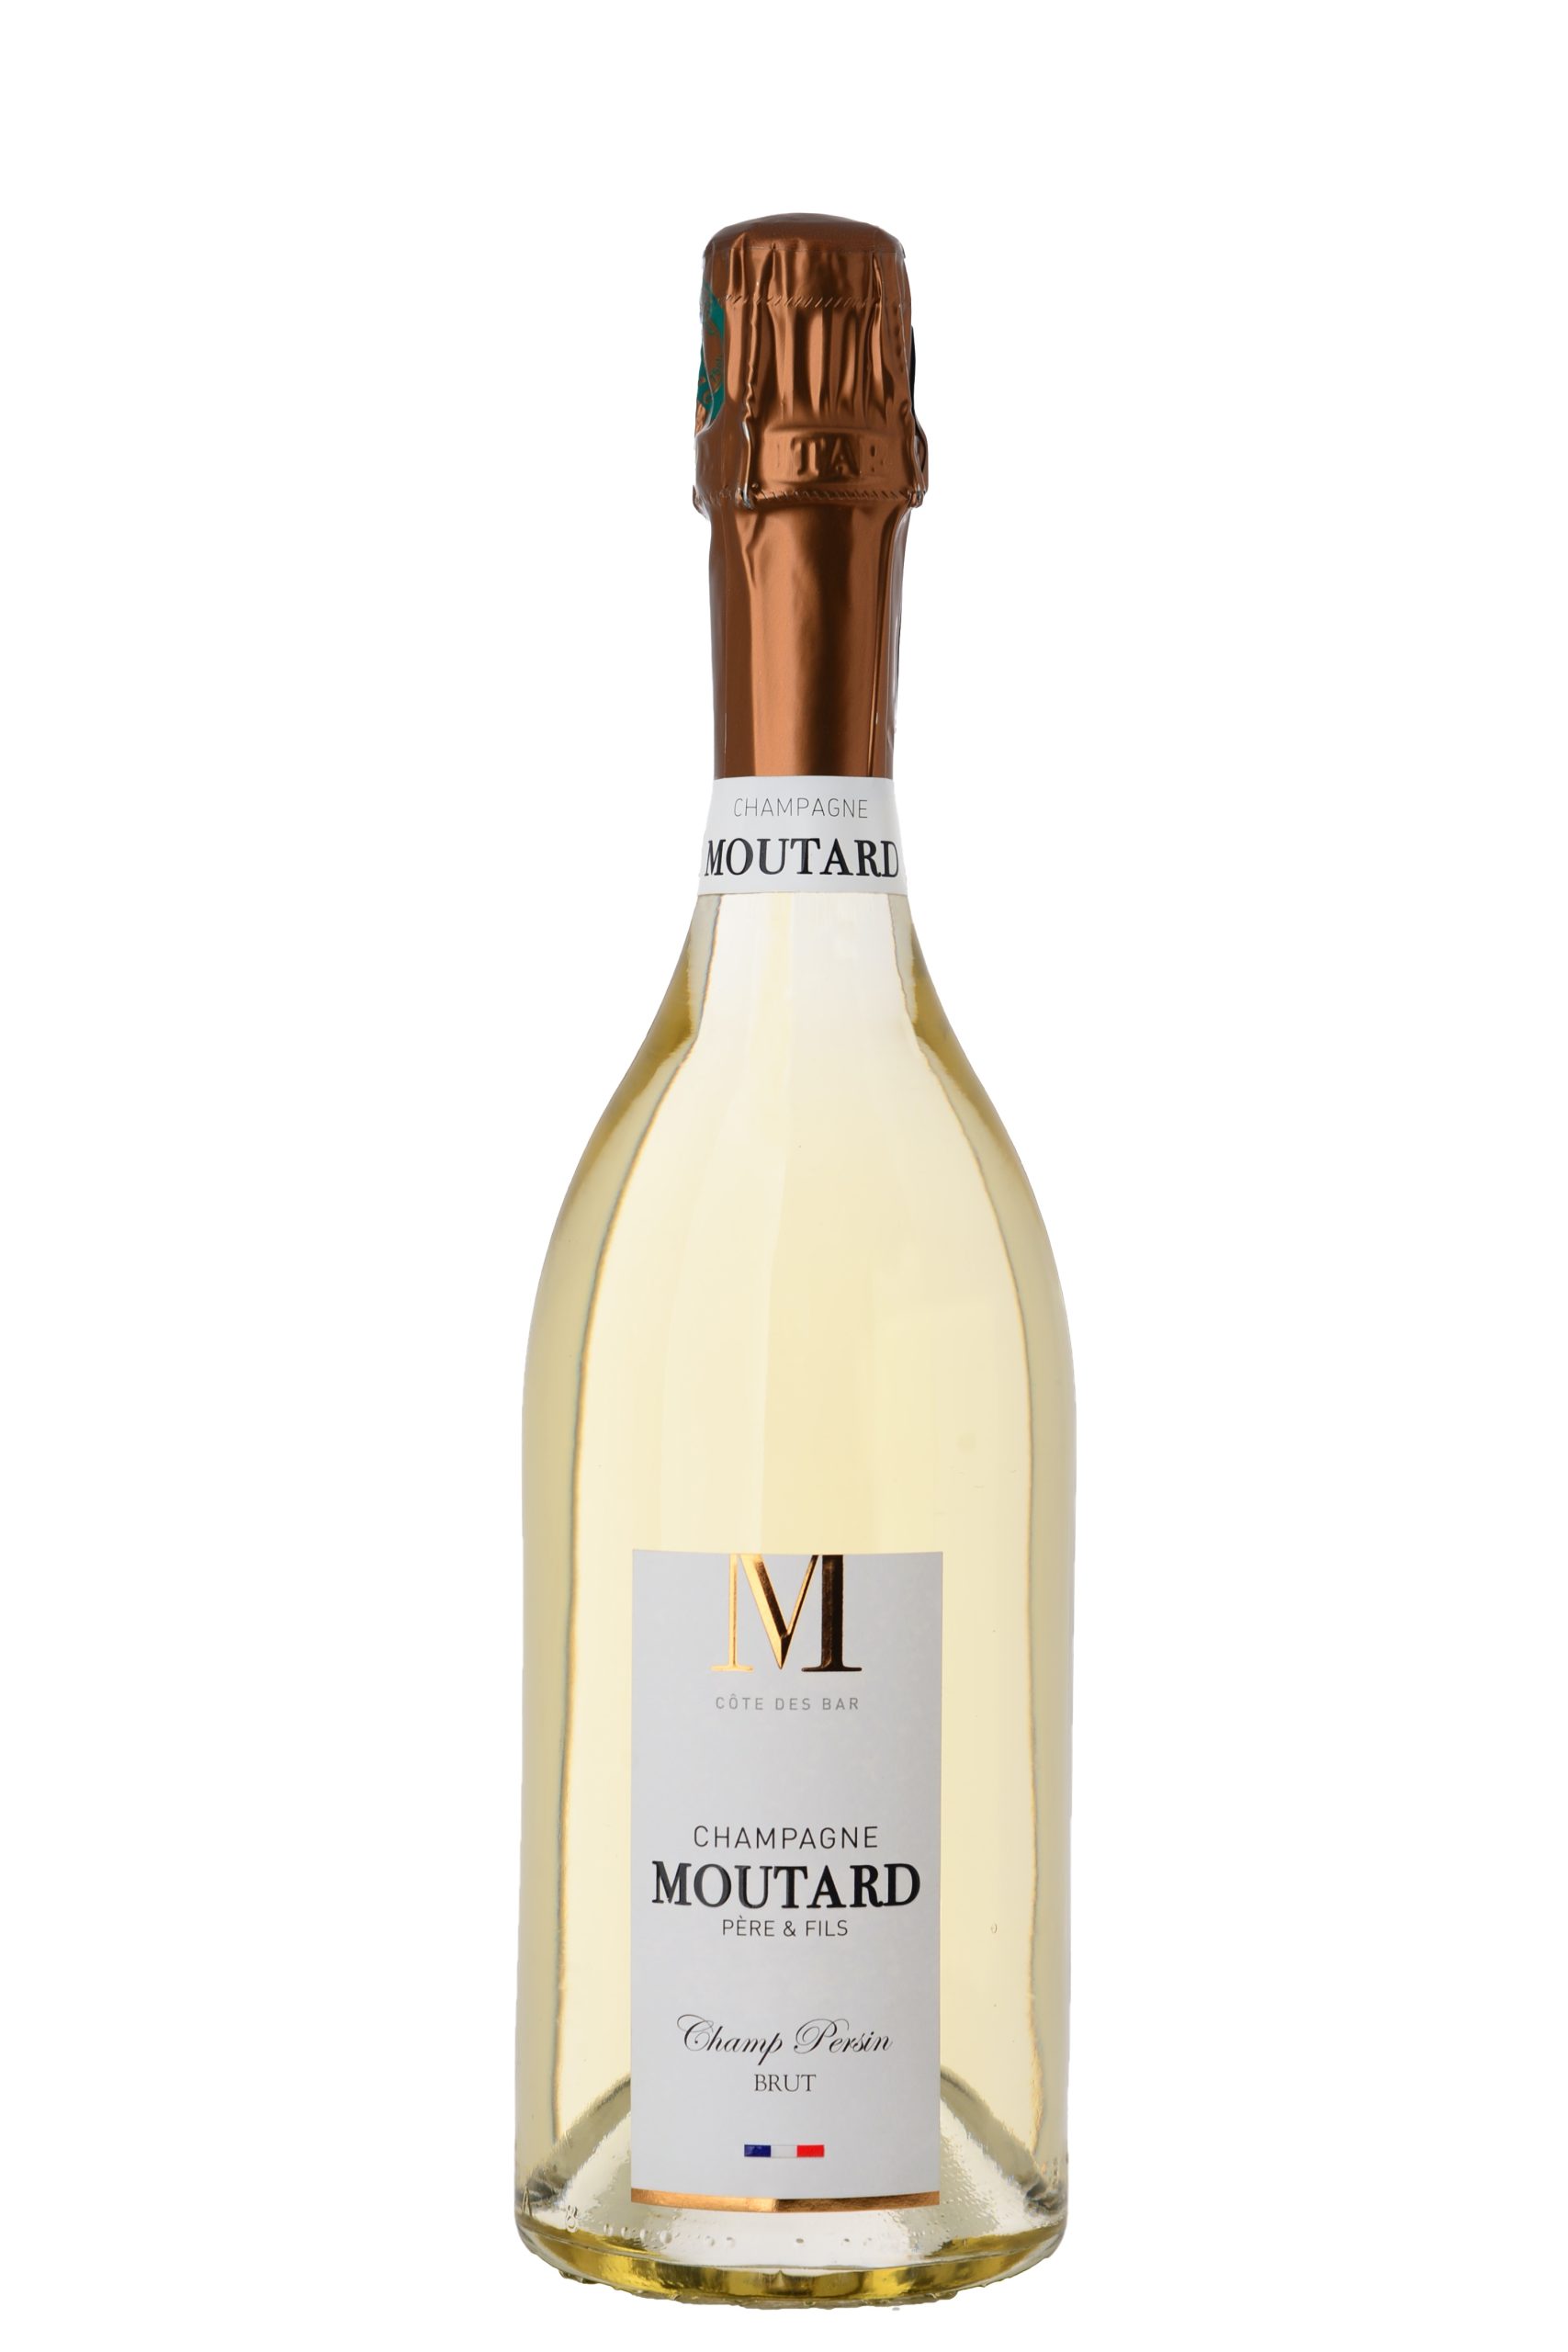 MOUTARD BRUT CHAMP PERSIN CHAMPAGNE 75CL